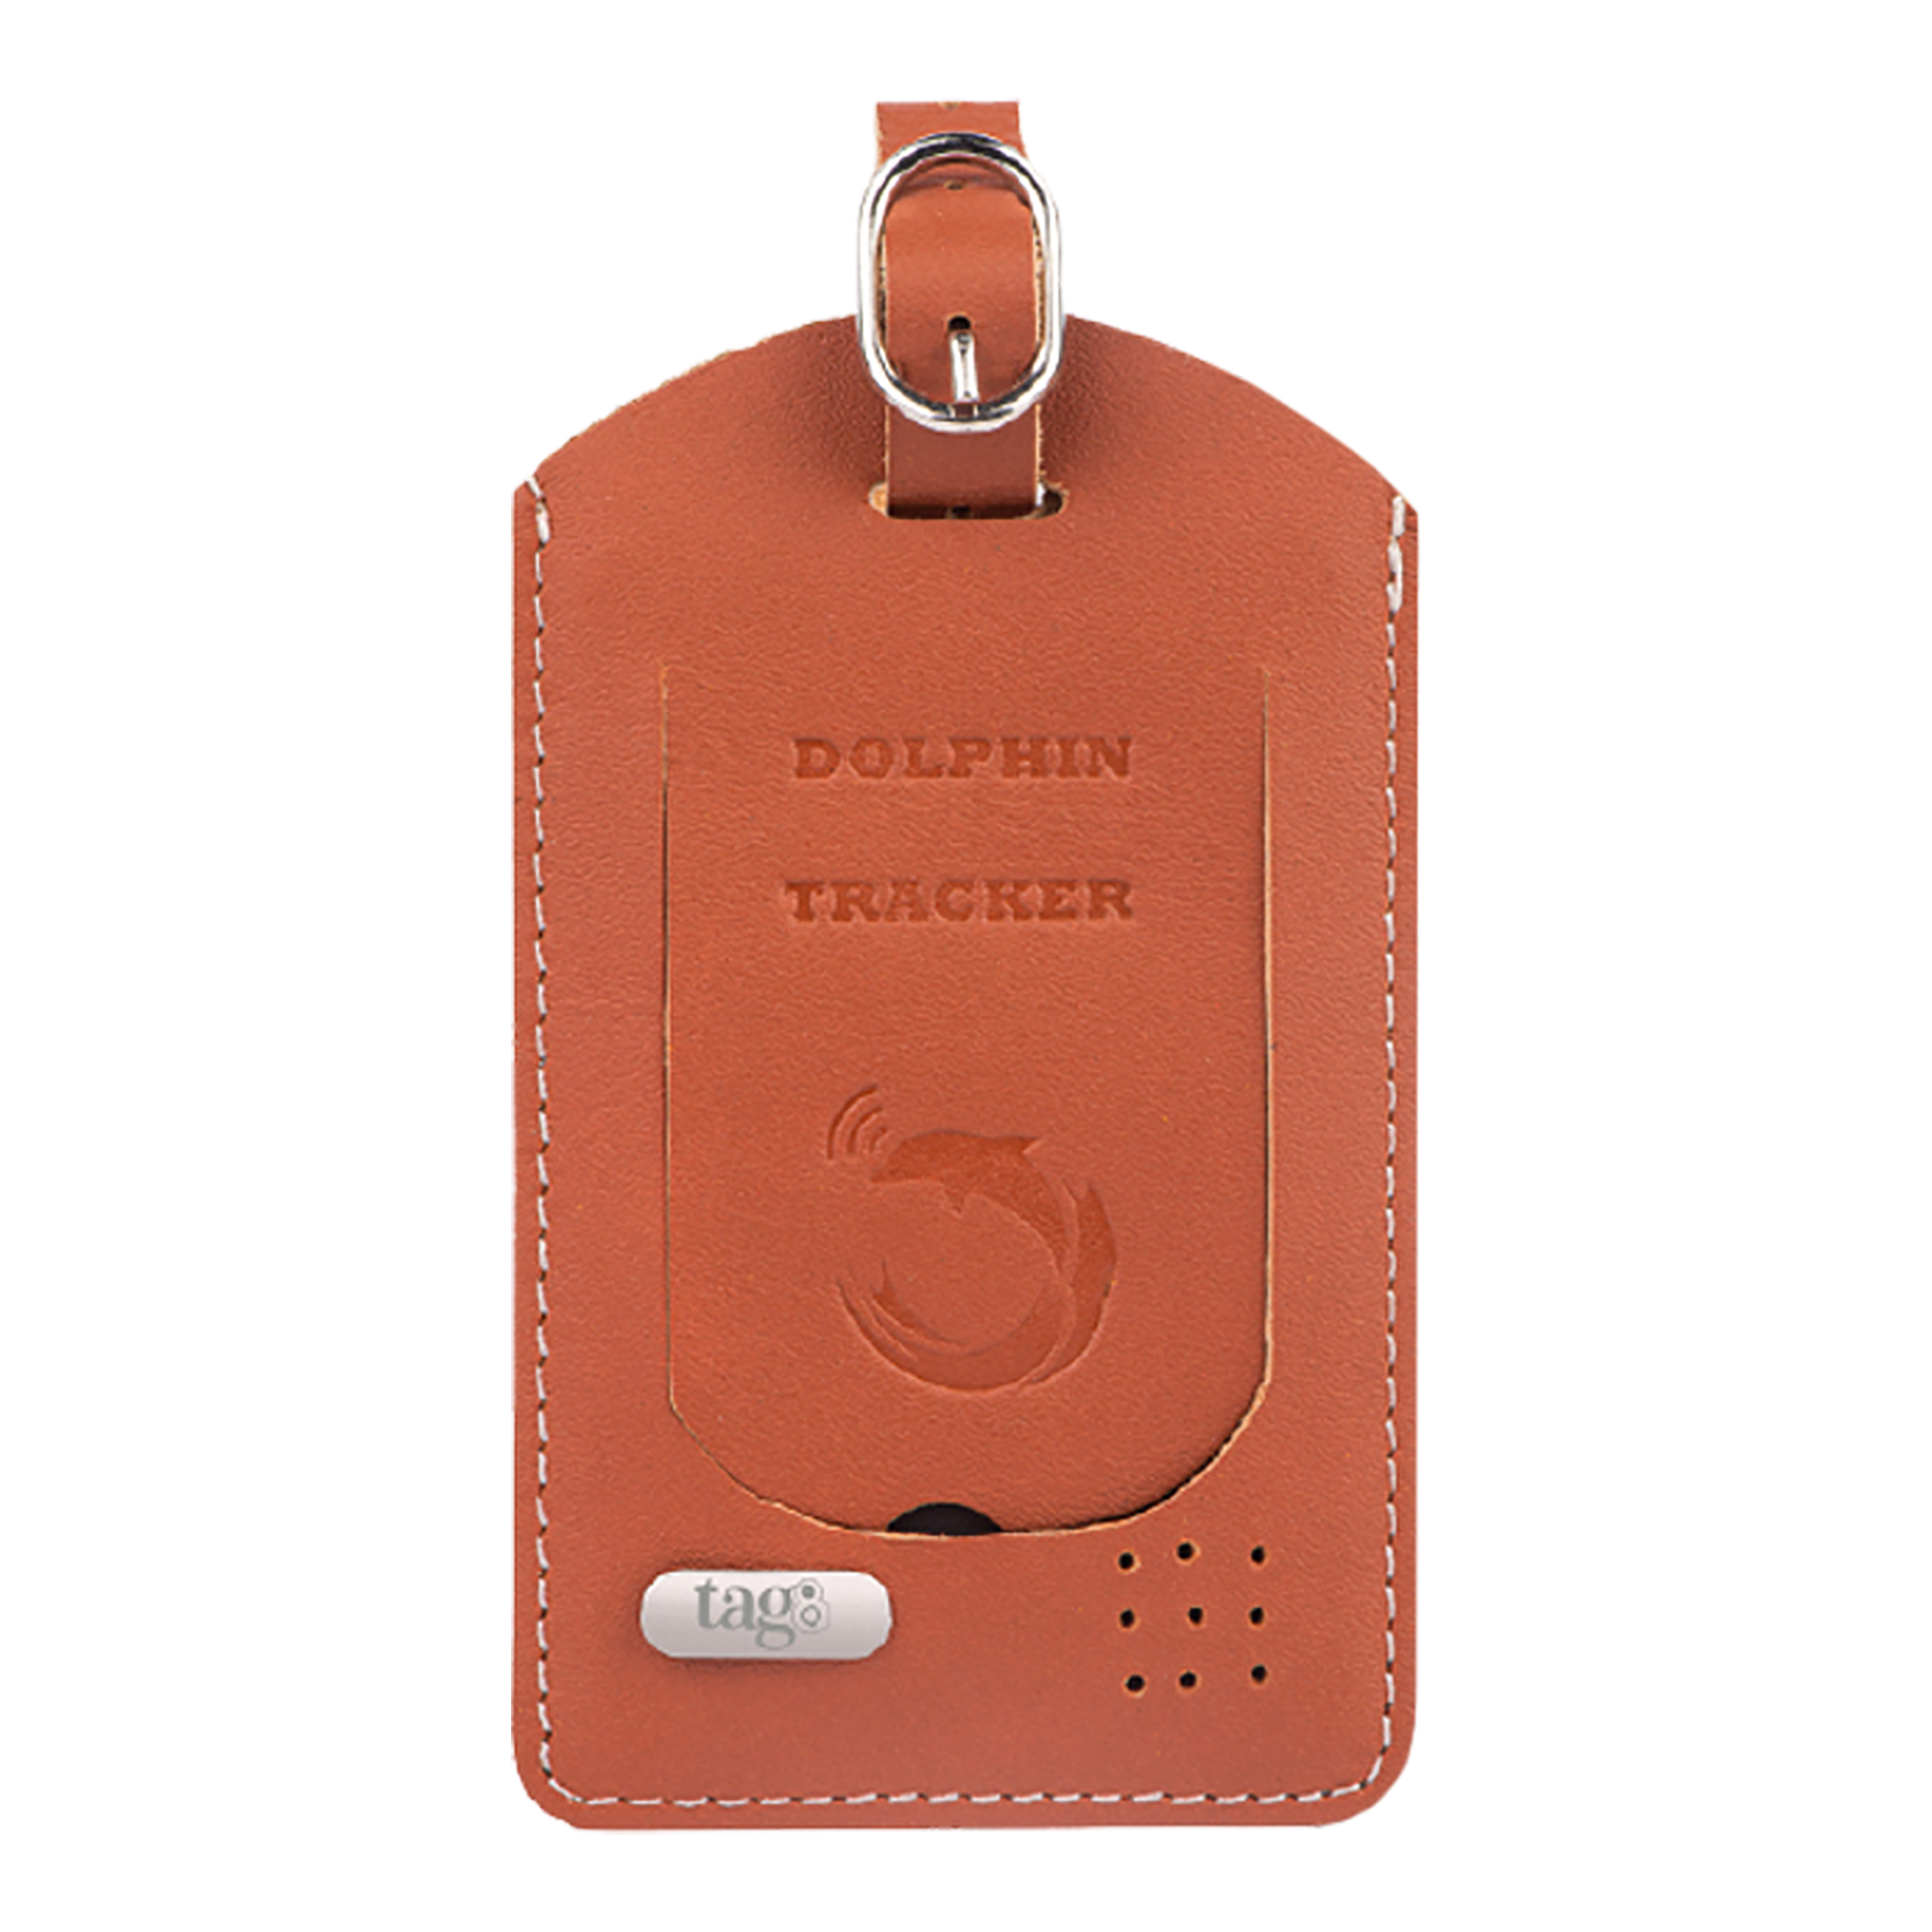 Tag8 Dolphin Smart Tracker (Anti-Lost Alarm System, 800035, Brown)_1